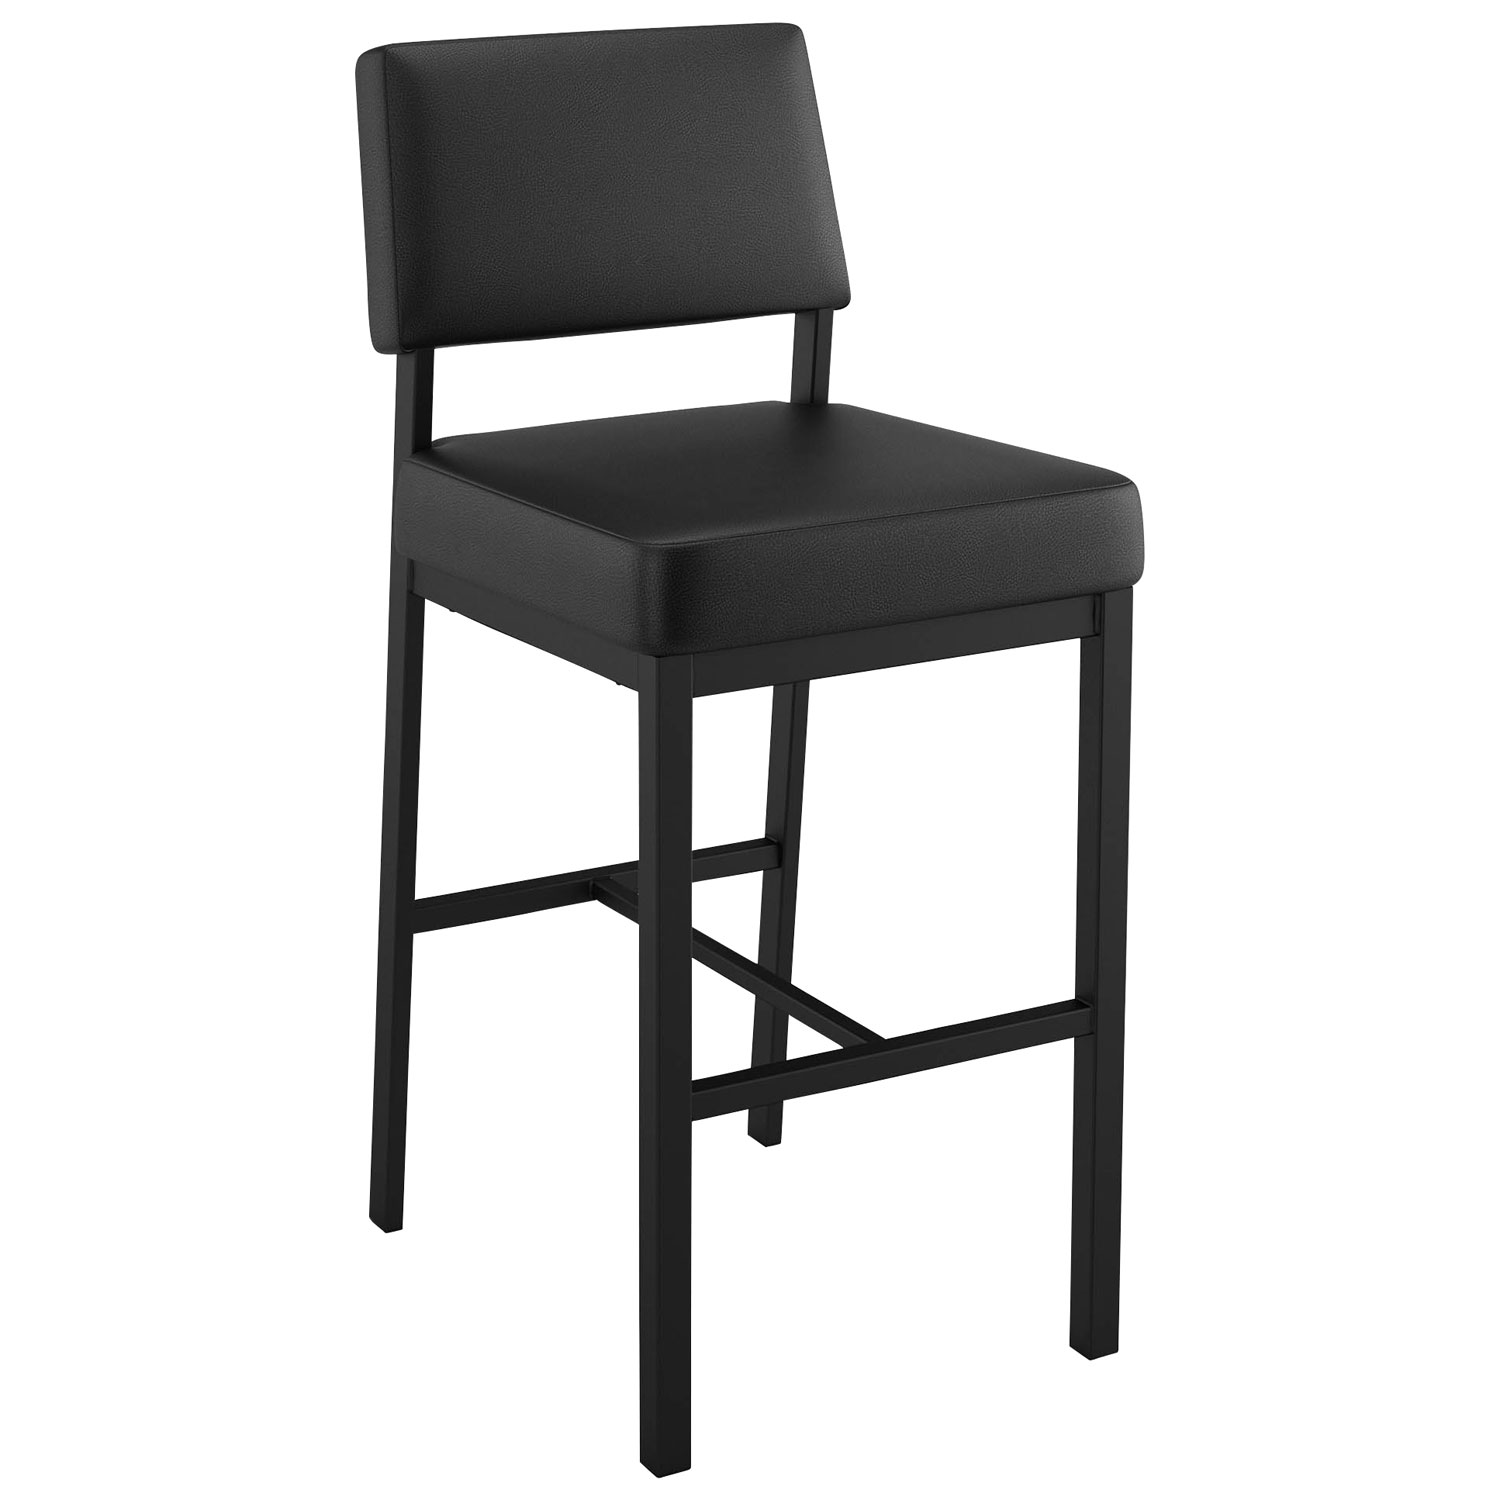 Avery Rustic Country Faux Leather Bar Height Barstool - Black